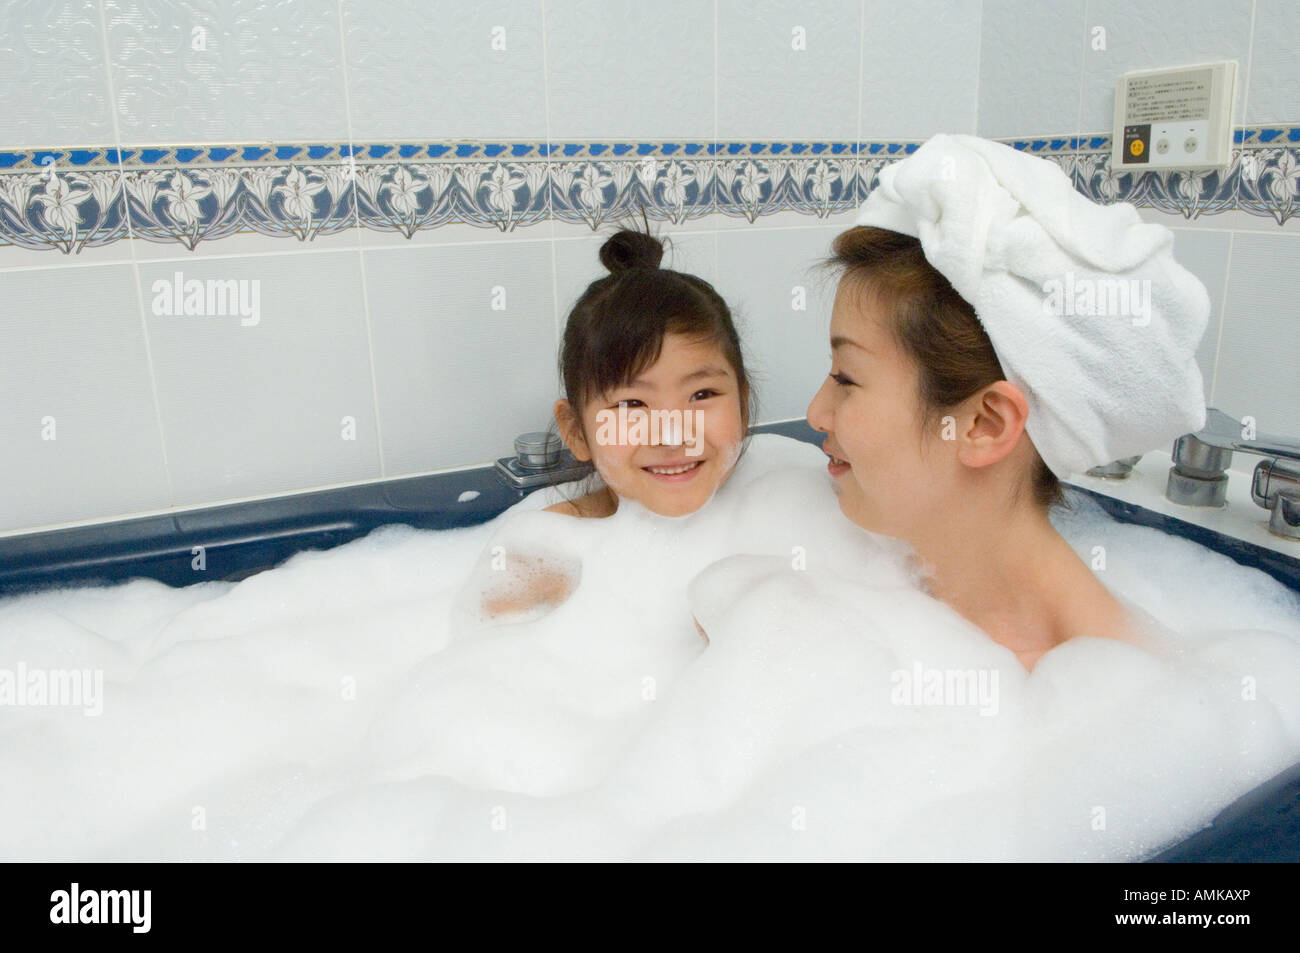 Mother and daughter taking bath Stock Photo